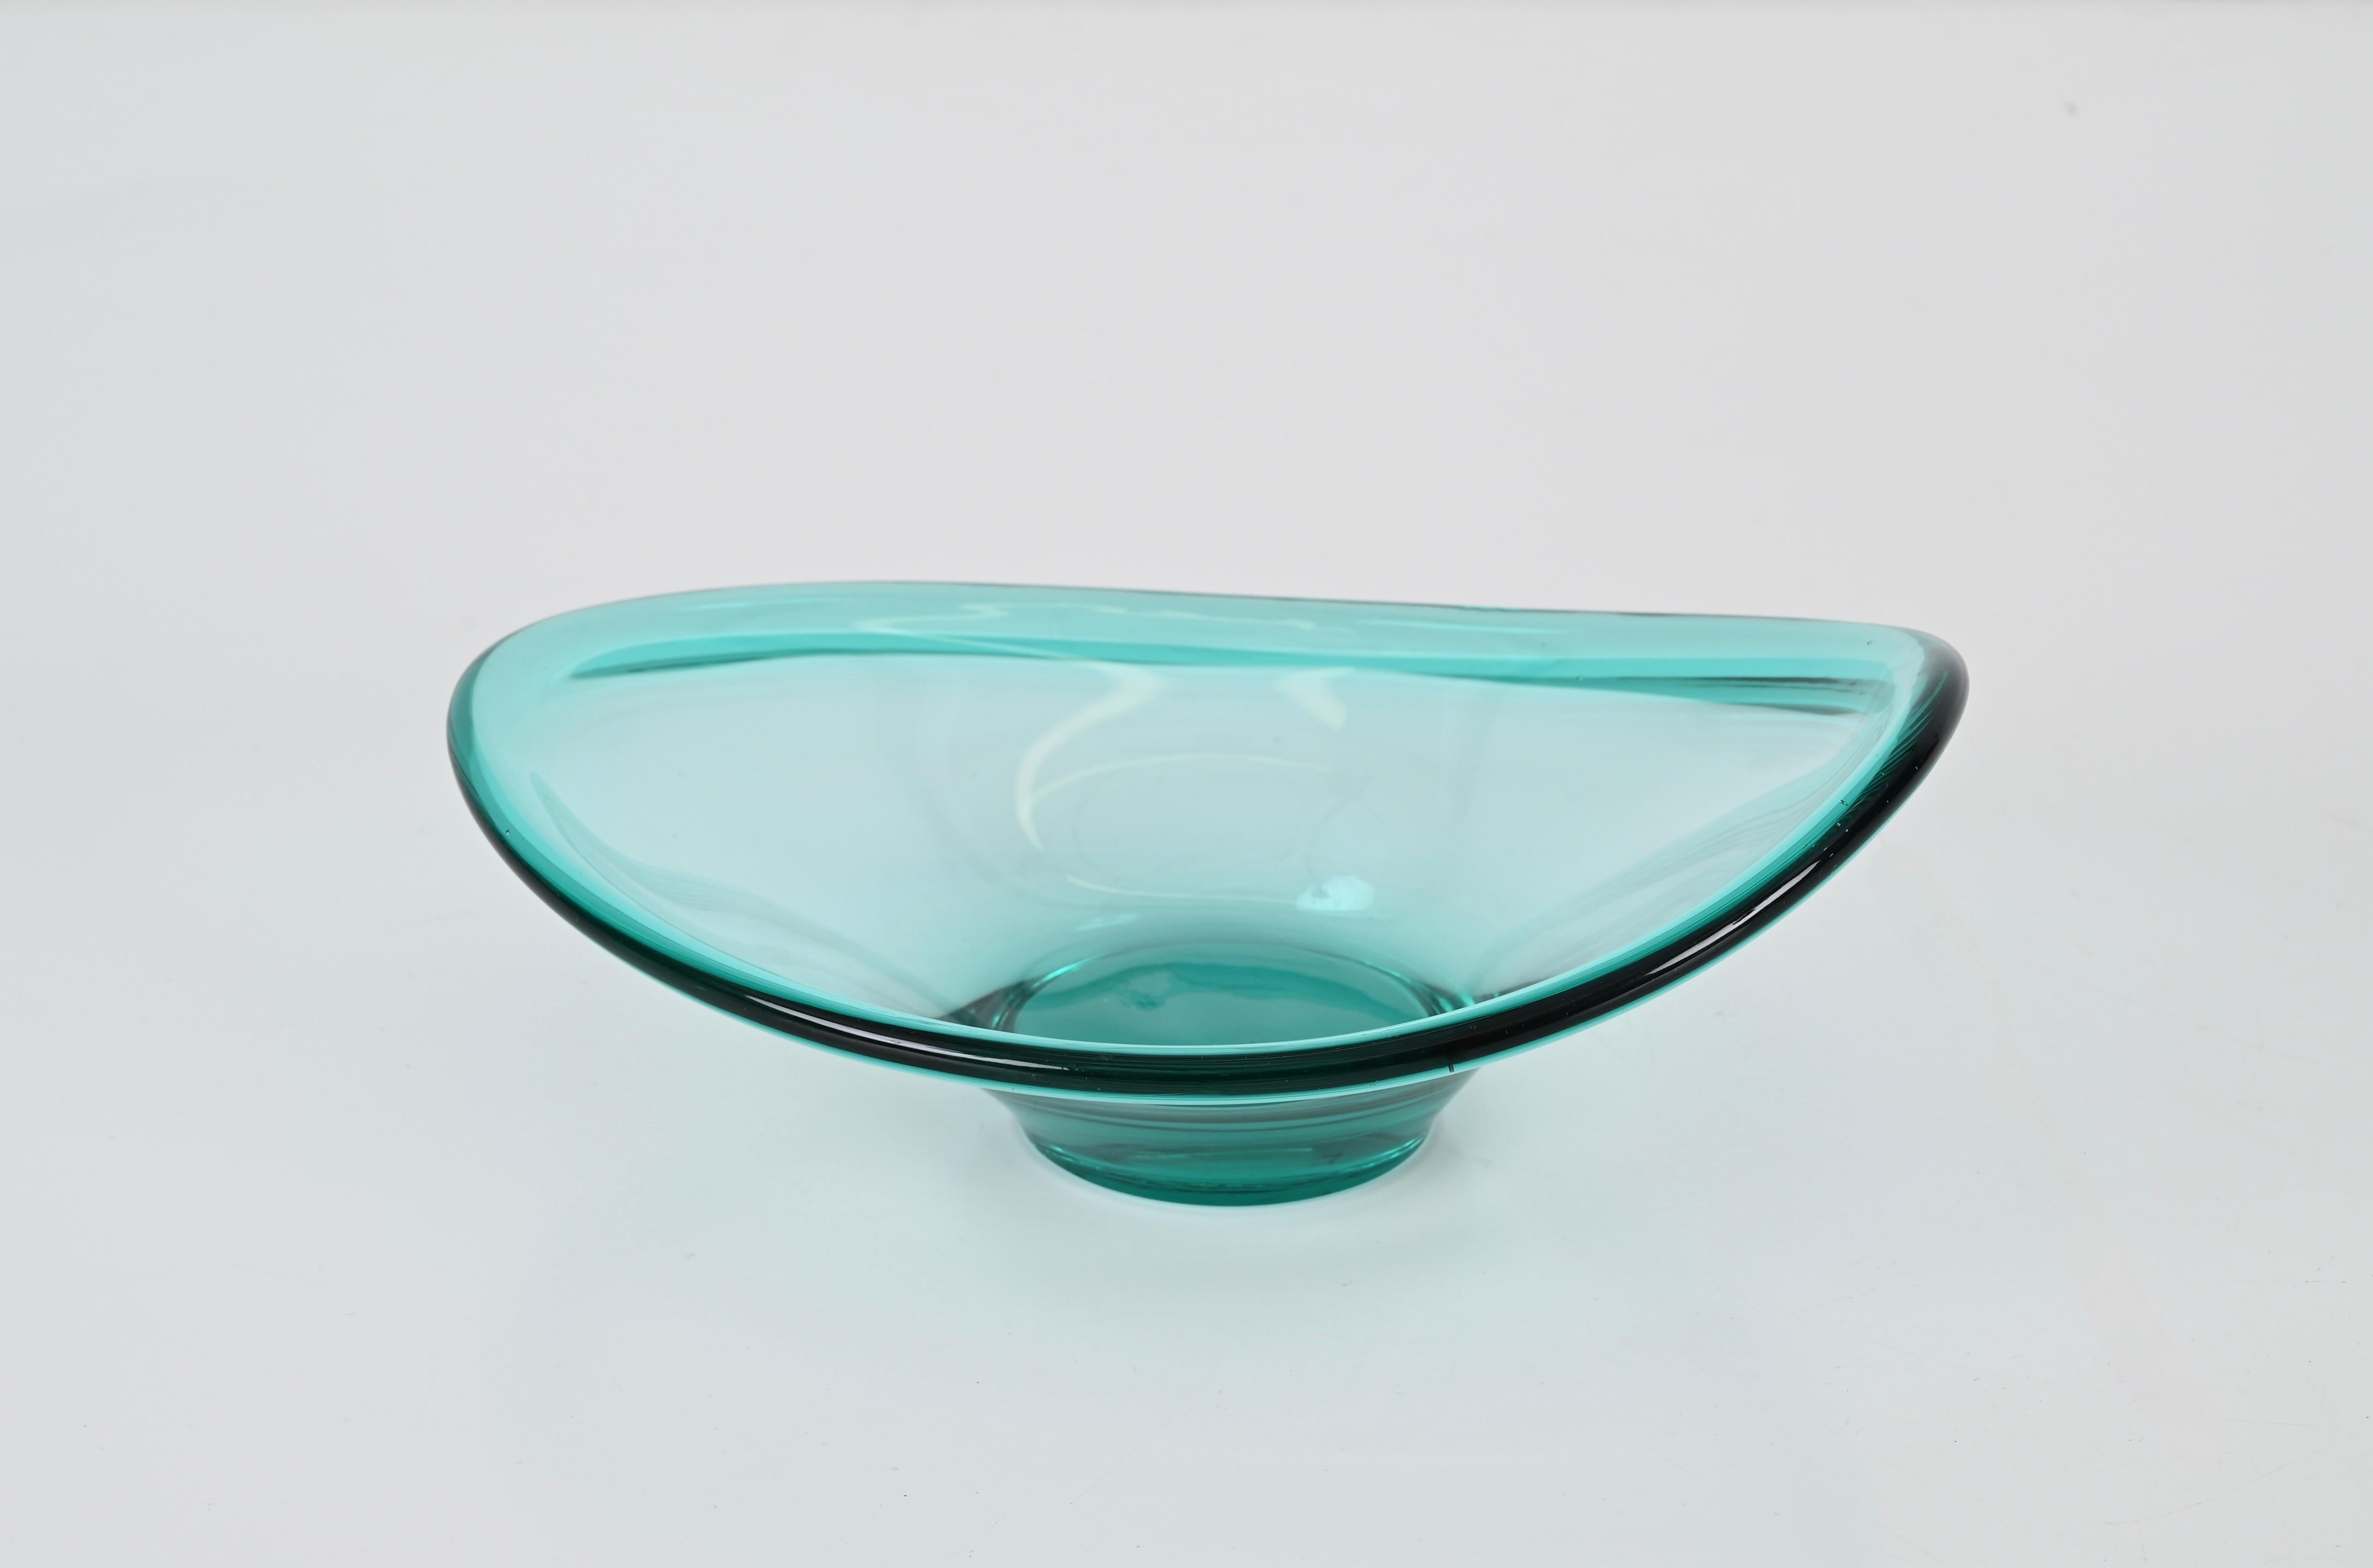 Tiffany Blue Murano Glass Bowl or Pocket Emptier, Italy, 1960s For Sale 4